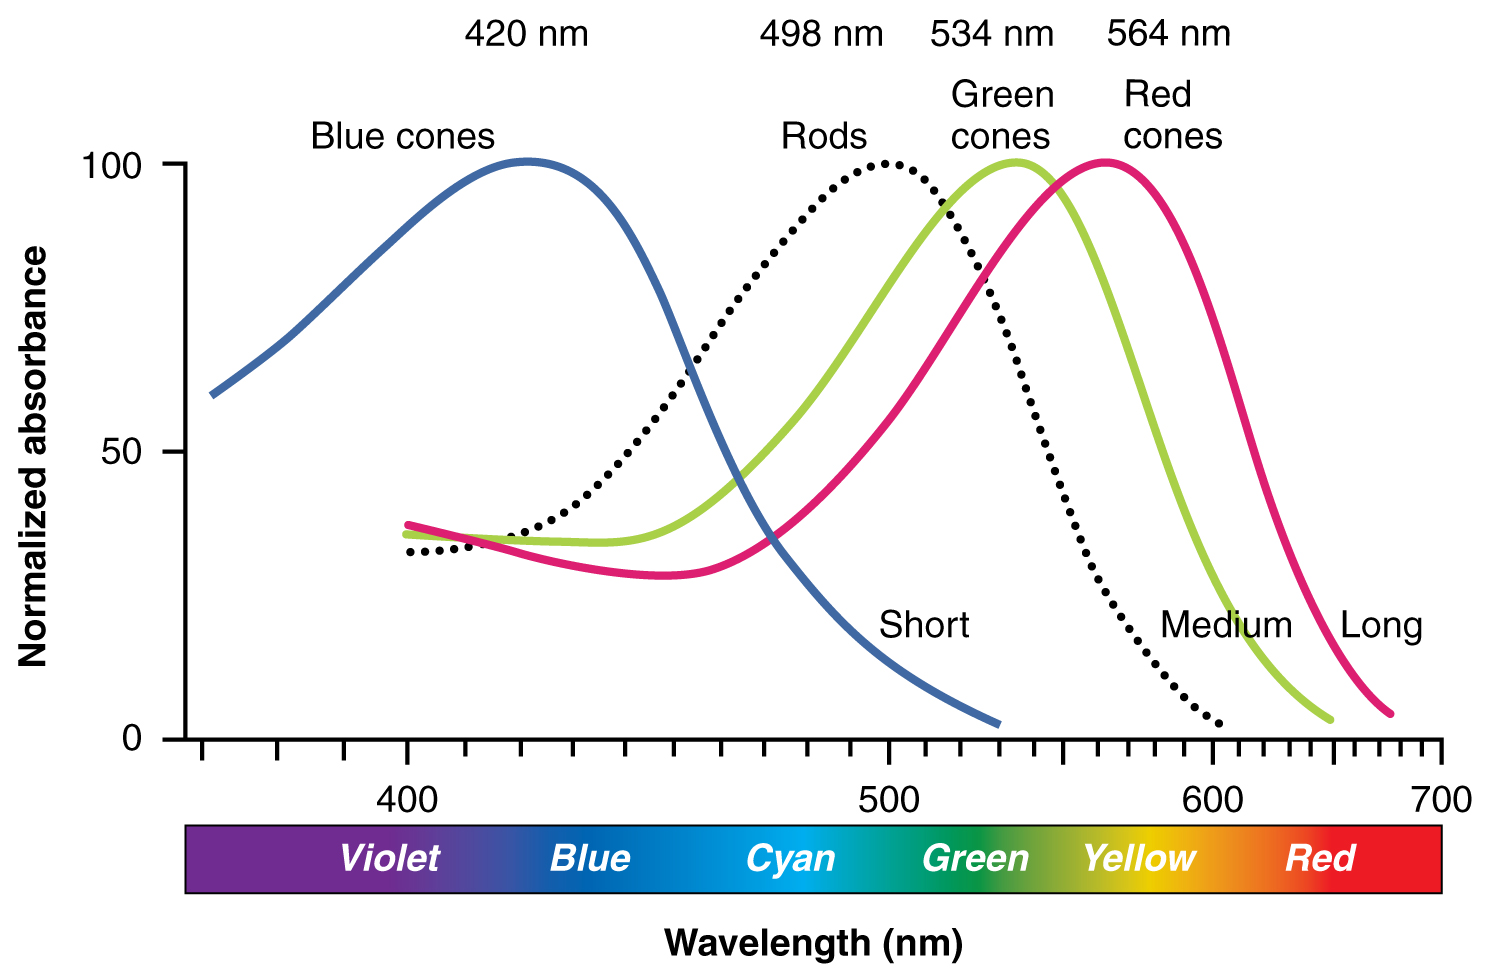 This graph shows the normalized absorbance versus wavelength for different cell types in the eye. The Y-axis is normalized absorbance, and the X axis is wavelength (nm) with the colours violet, blue, cyan, green, yellow, and red across the bottom. The lines in the graph indicate blue cones which peak at 420 nm, rods which peak at 498 nm, green cones which peak at 534 nm, and red cones which peak at 564 nm. Blue cones line is labelled as short, green cones as medium, and red cones as long.